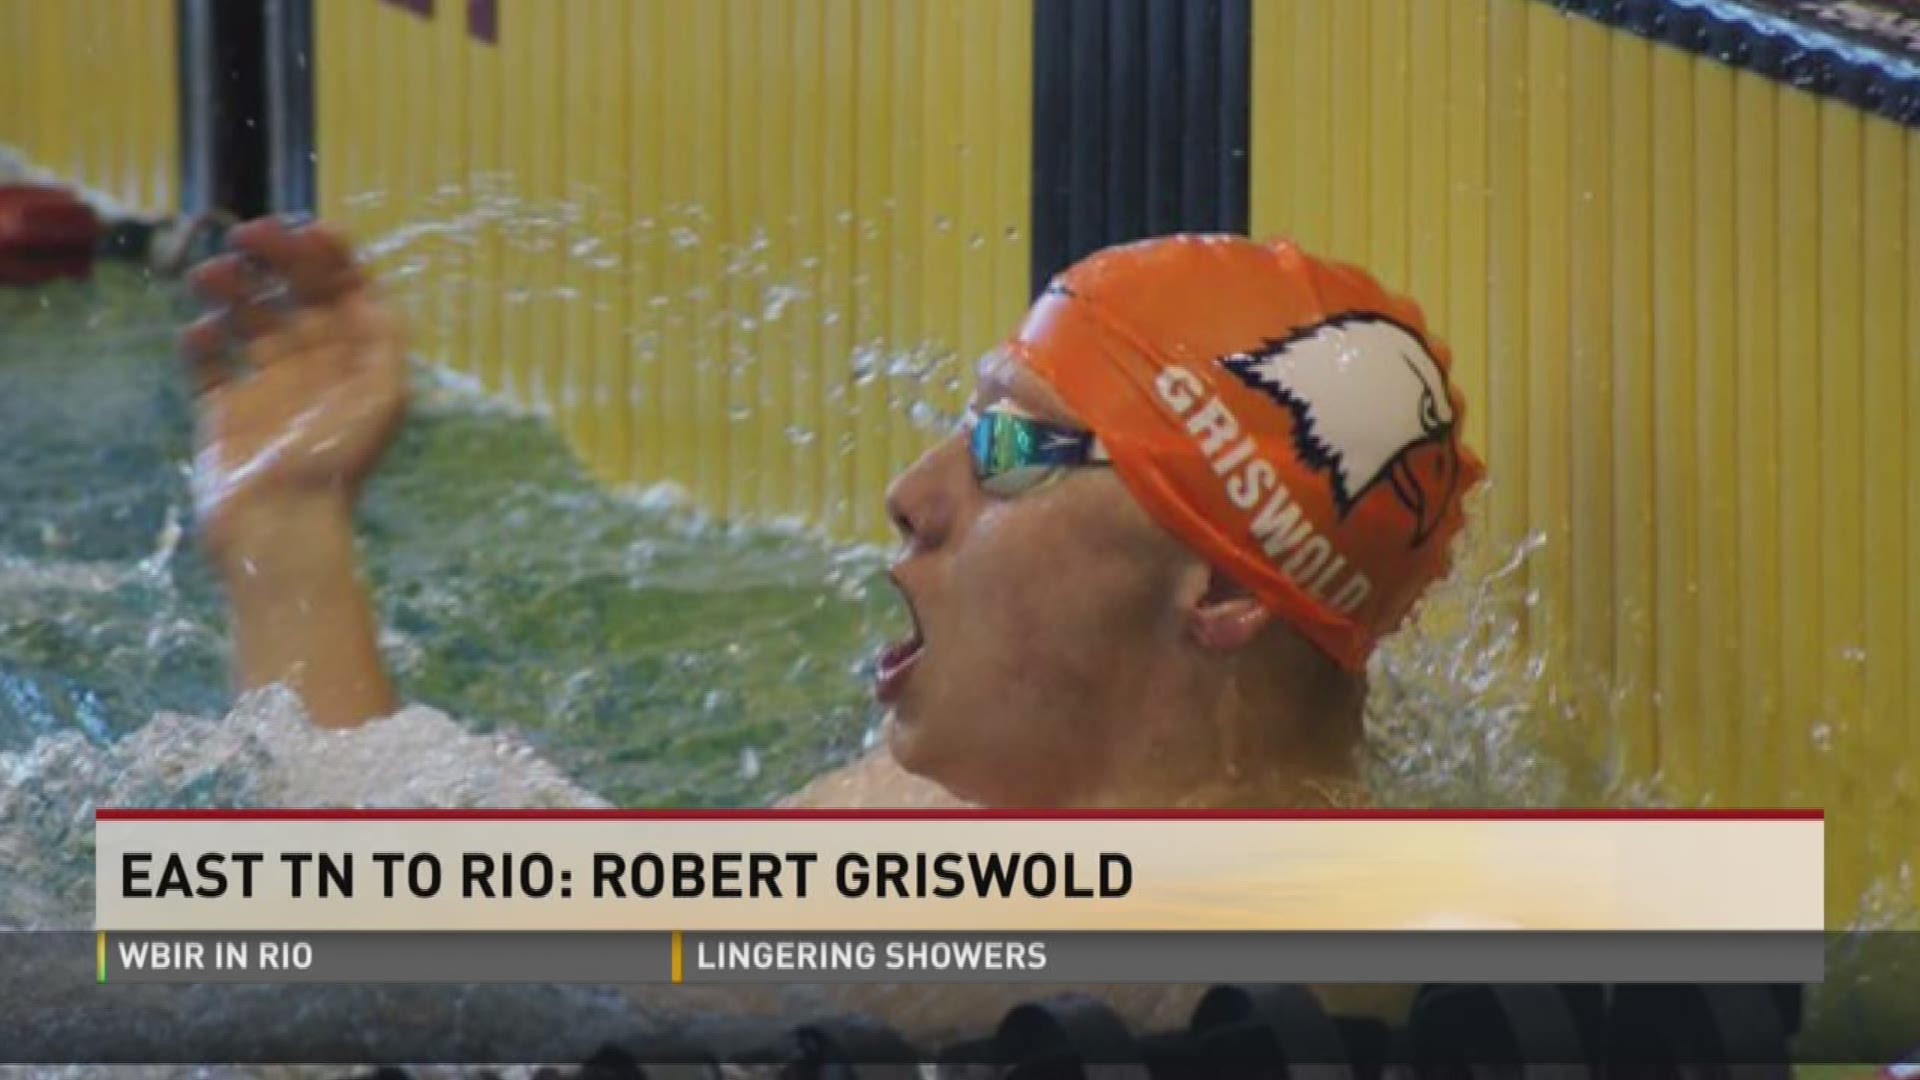 Robert Griswold is one of the 10 members of the U.S. Paralympic swimming team.